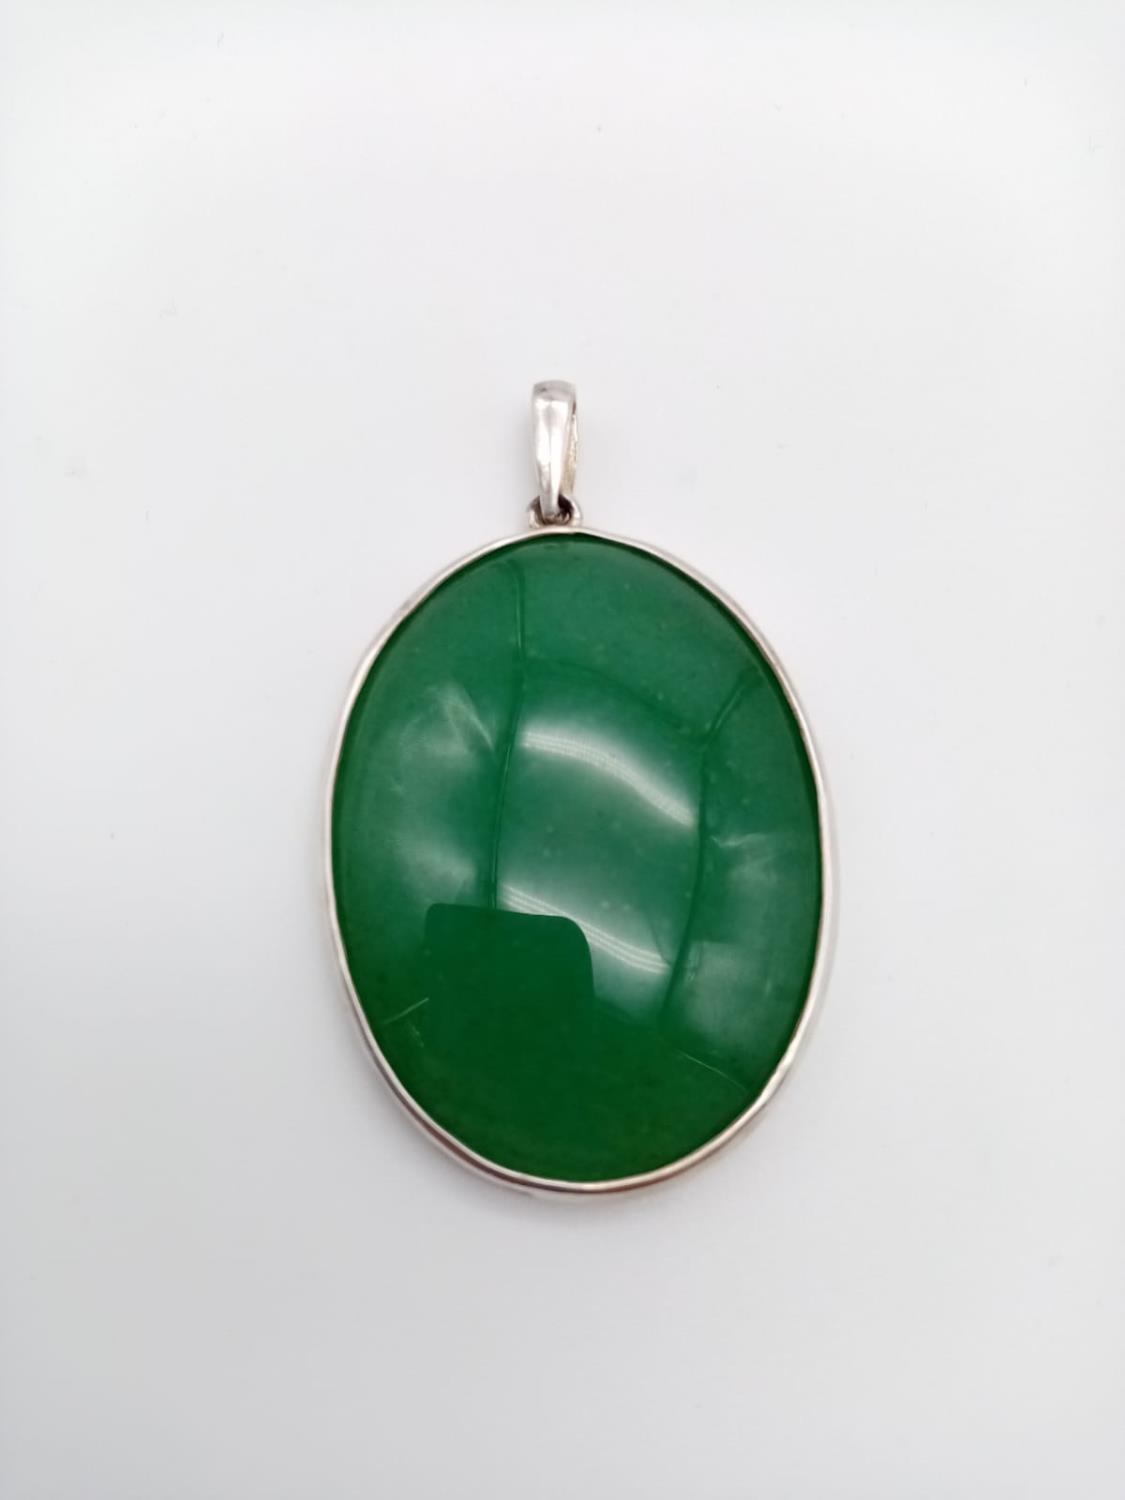 Large oval jade silver pendant, weight 16g approx